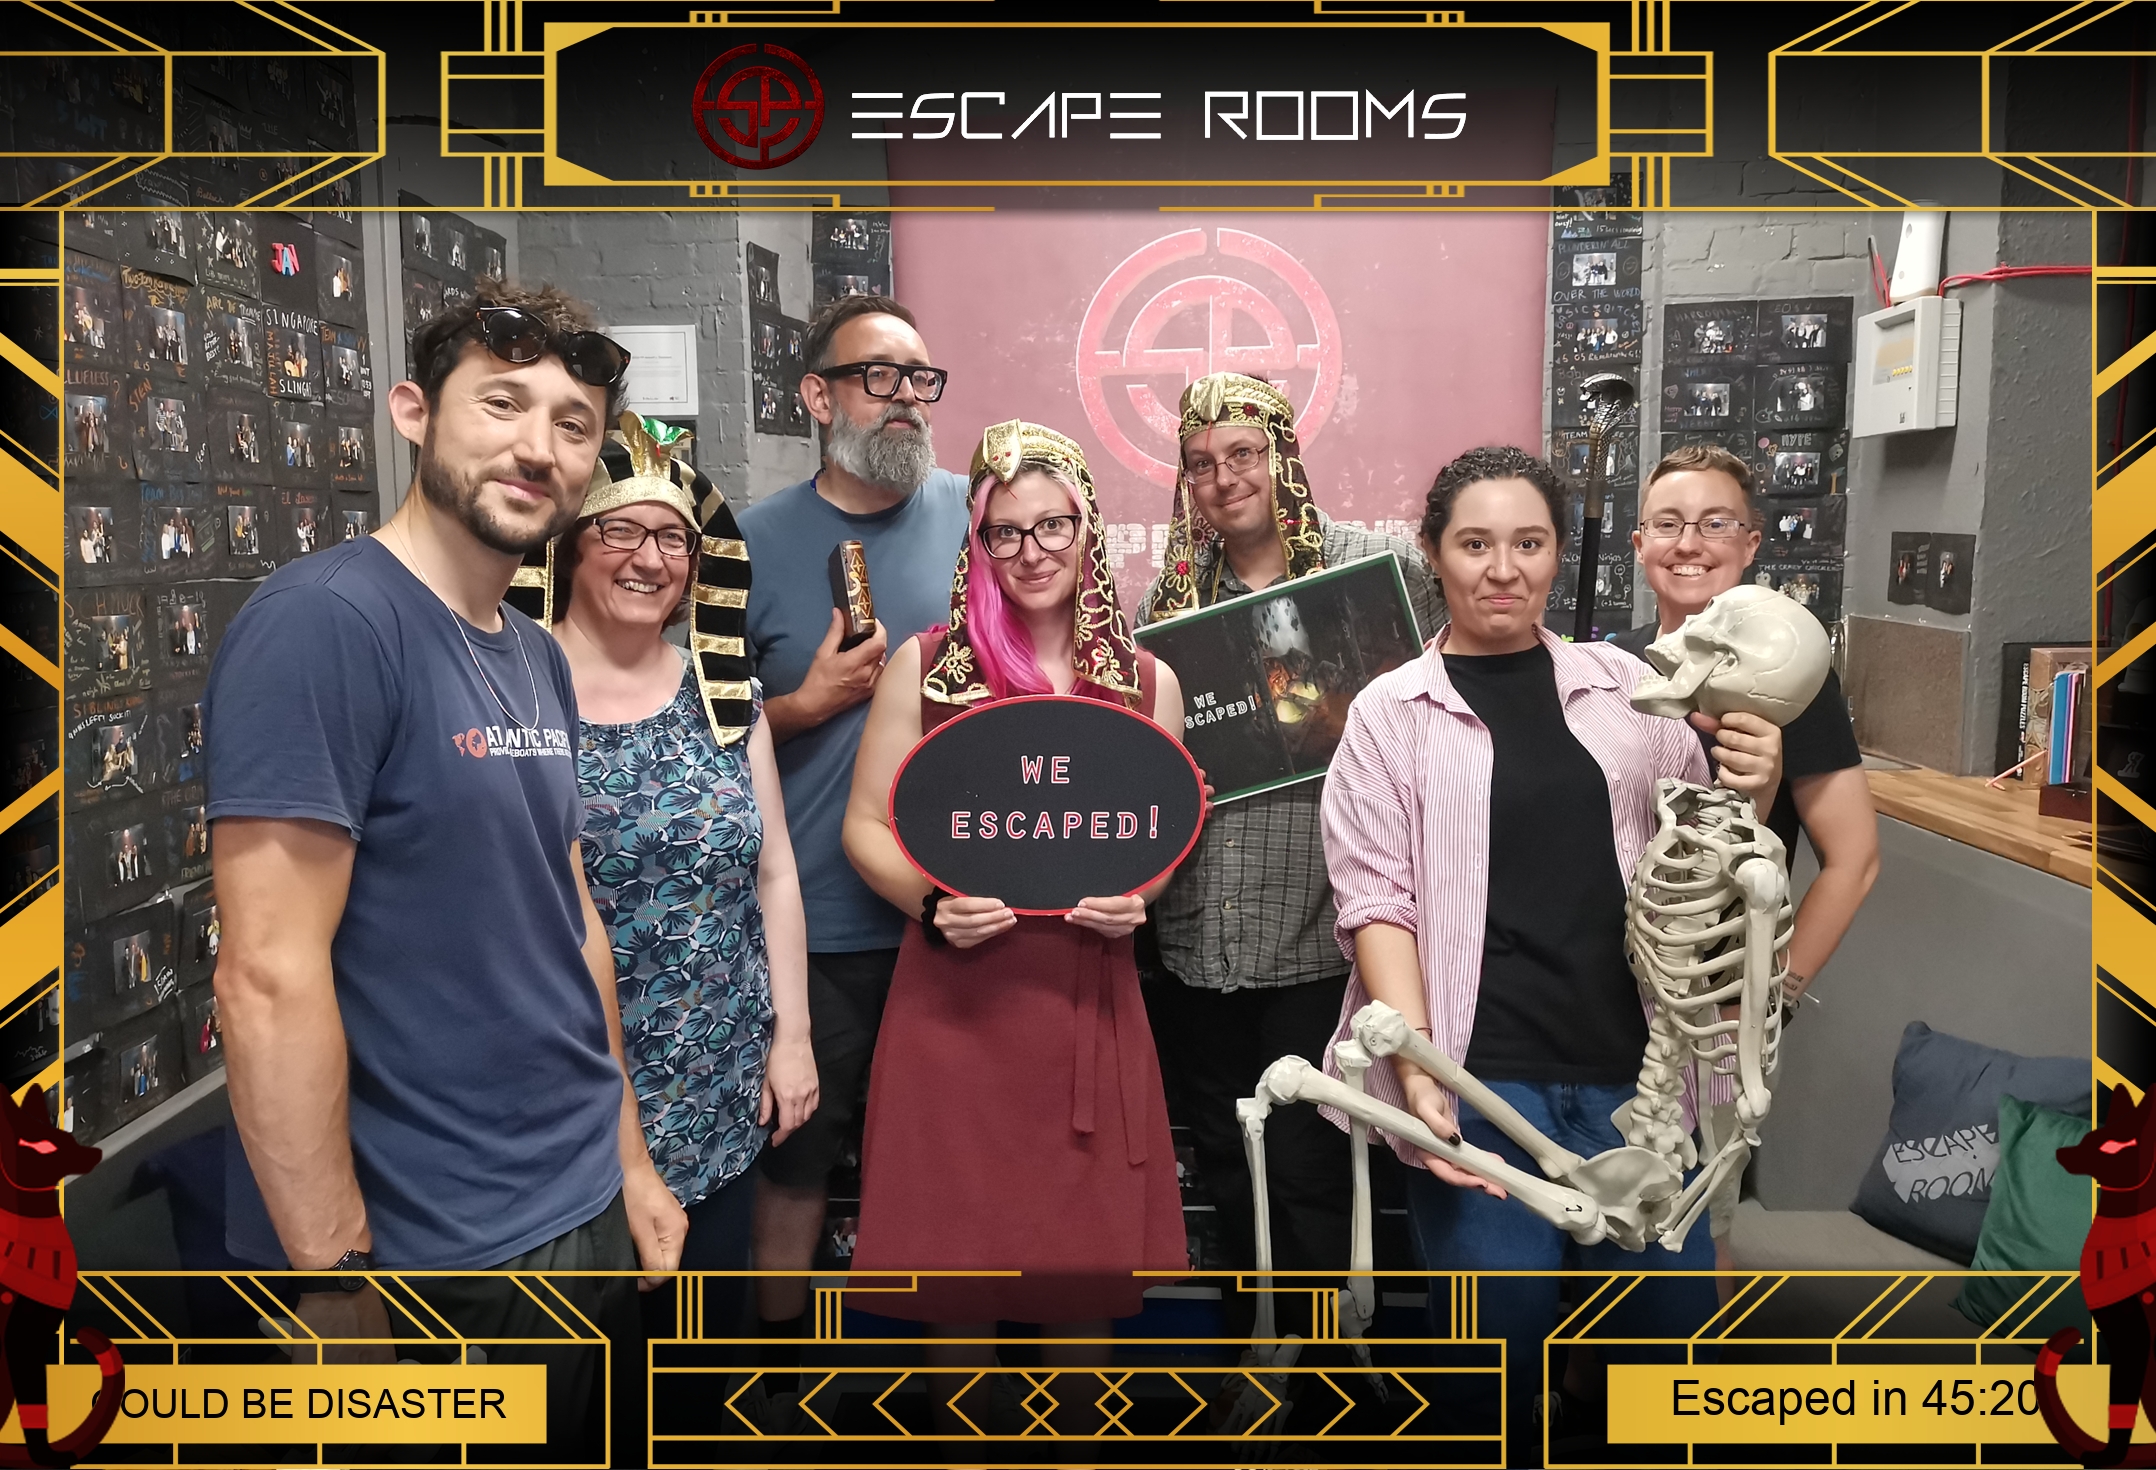 Photo of the Connected by Data team having escaped the Escape Room